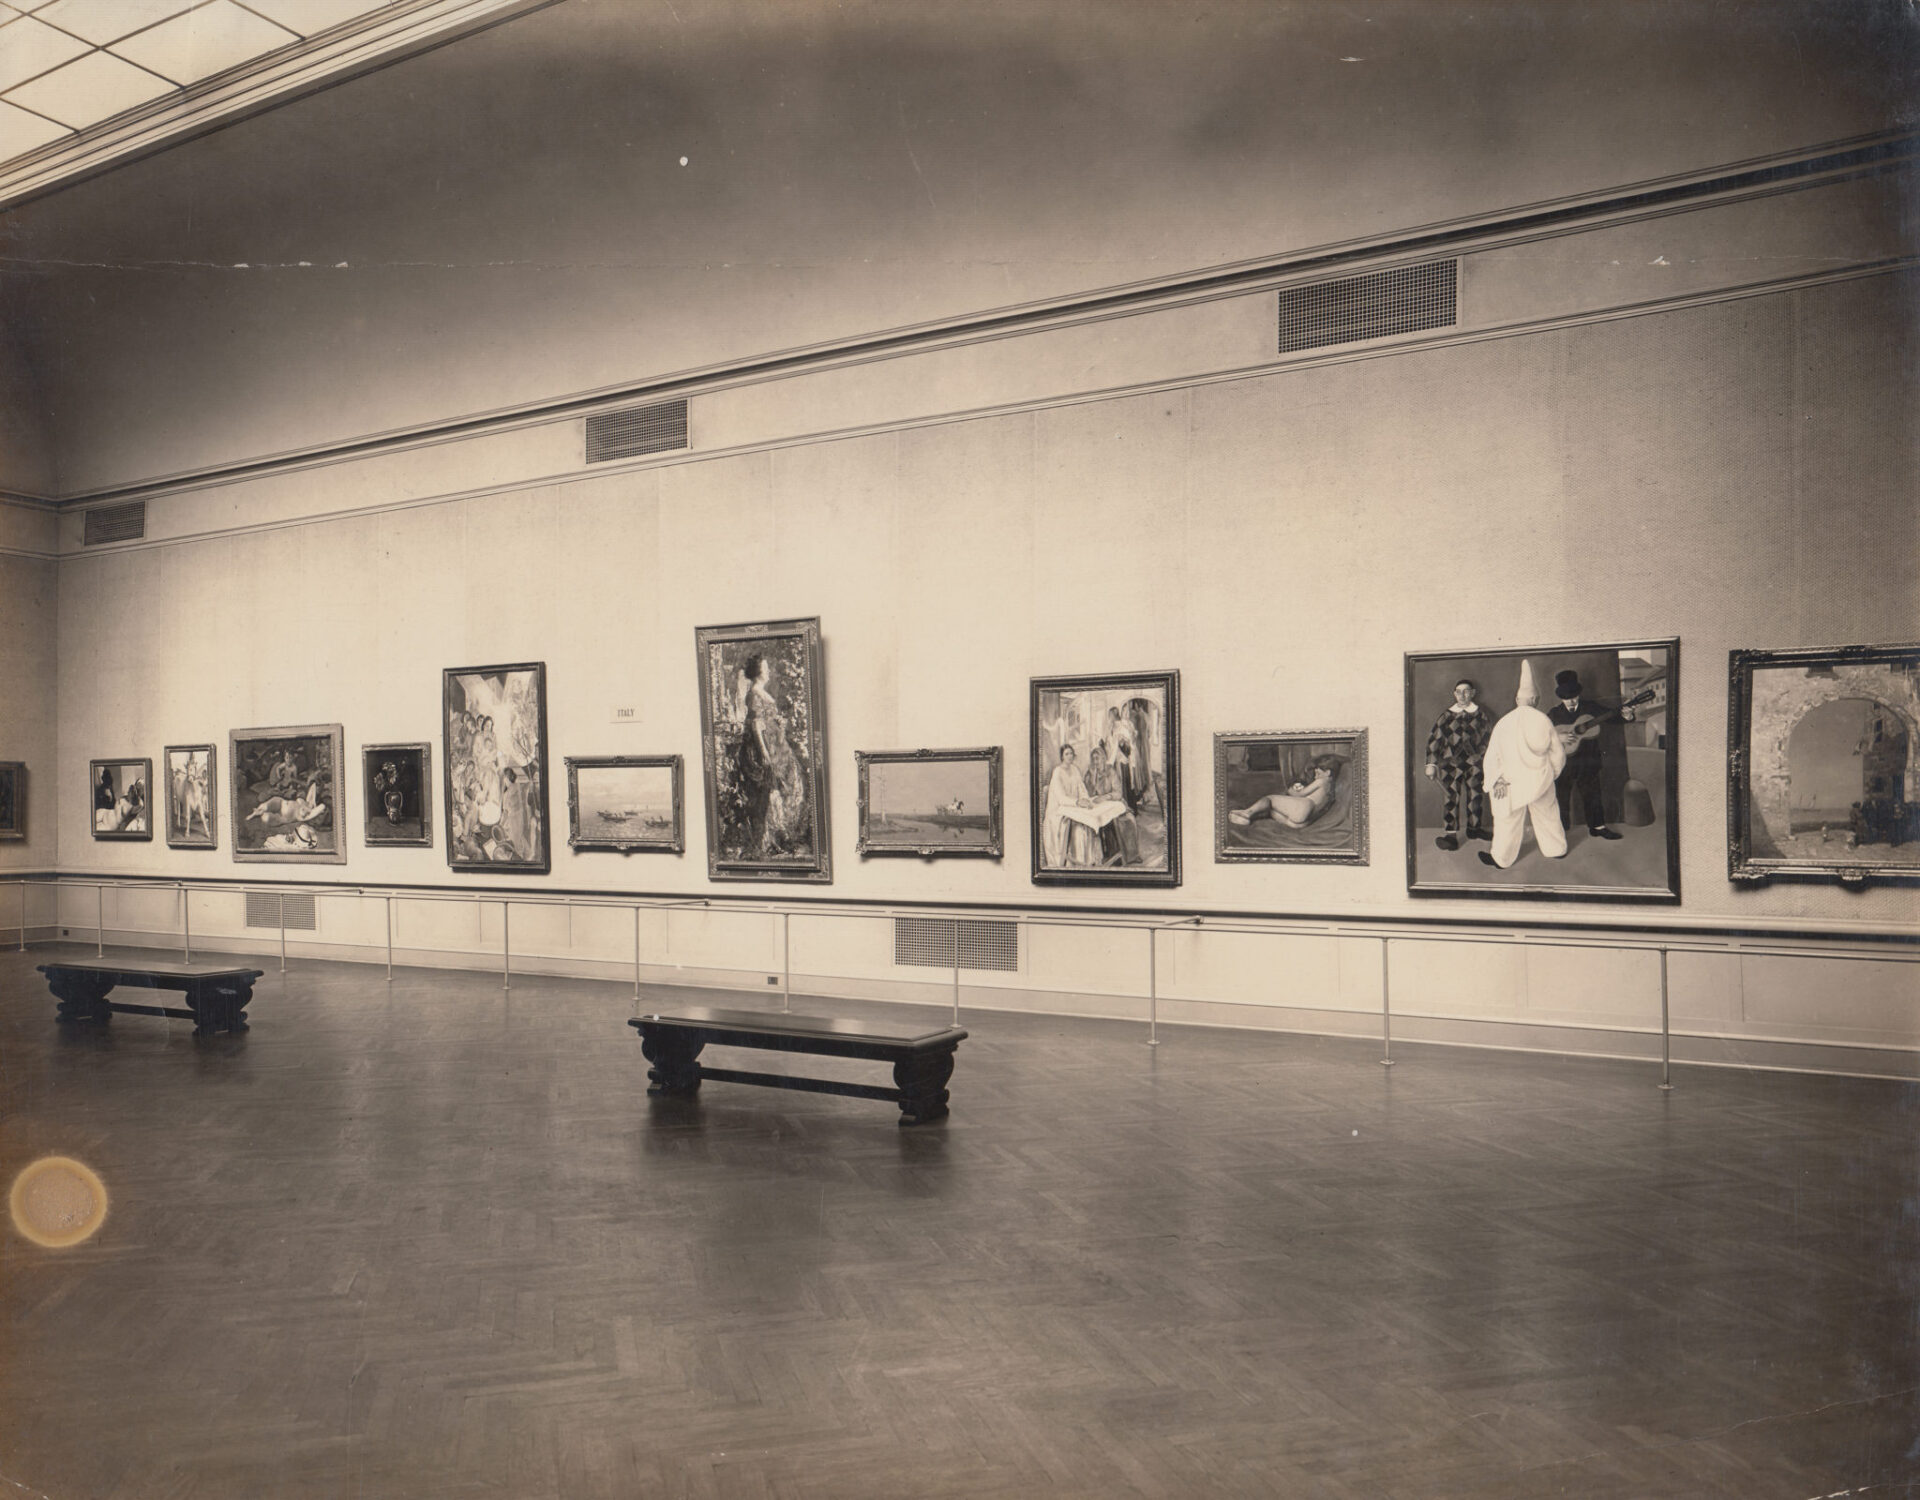 Ways Of Looking At Art - 50 Cards to Shift Your Perspective - Philadelphia  Museum Of Art